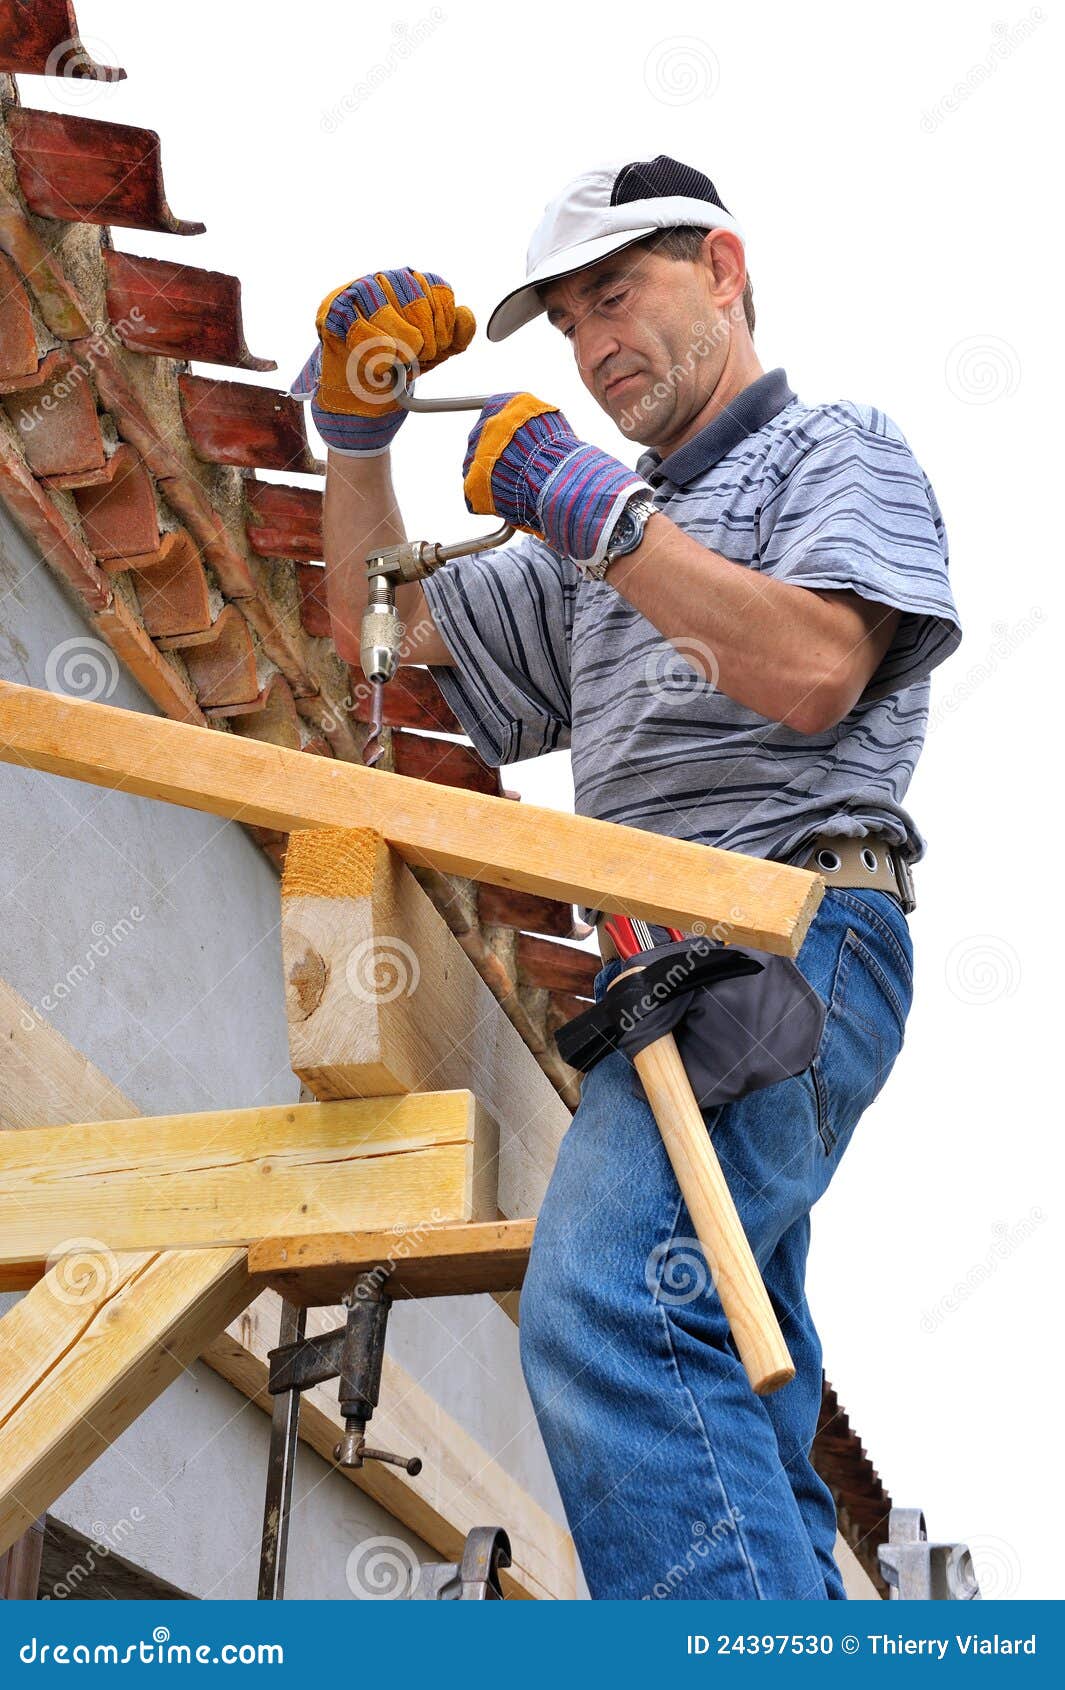 Woodworking carpenter stock photo. Image of eaves, people ...